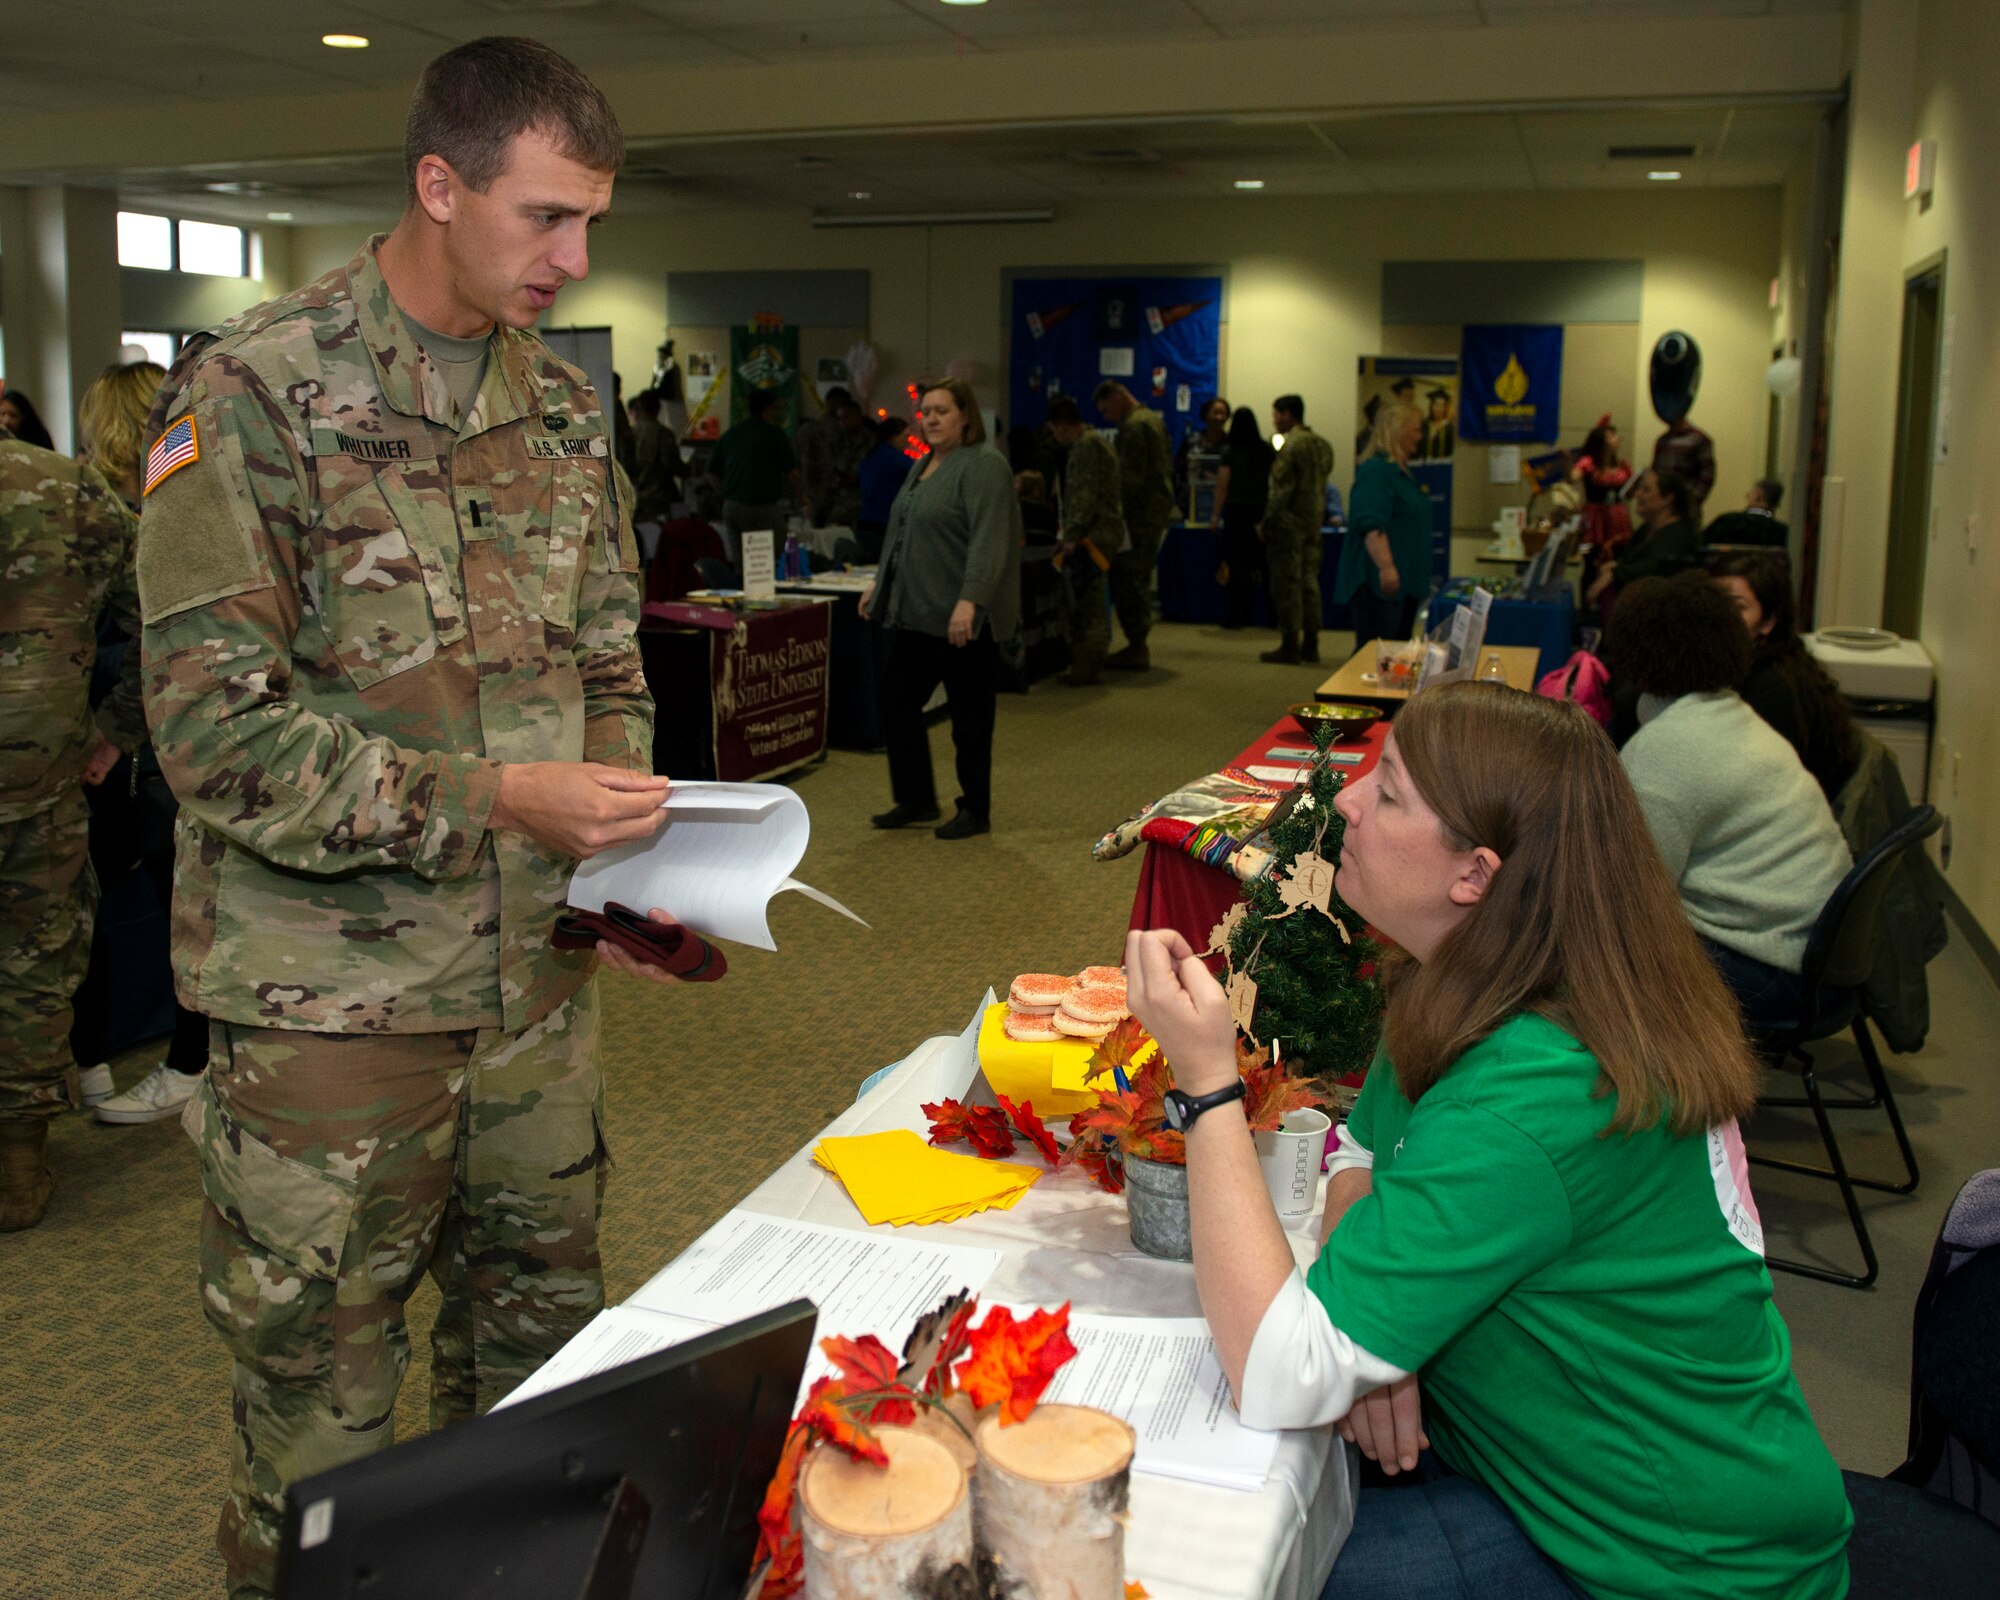 U.S. Army 1st Lt. Patrick Witmer, a platoon leader with the 6th Brigade Engineer Battalion, 4th Infantry Brigade Combat Team (Airborne), 25th Infantry Division, U.S. Army Alaska, learns about scholarships available for his spouse during the Fall Education Fair at Joint Base Elmendorf-Richardson, Alaska, Oct. 31, 2019. The JBER Army Education Center hosted the event, which allowed more than 20 vendors to showcase a variety of educational opportunities.